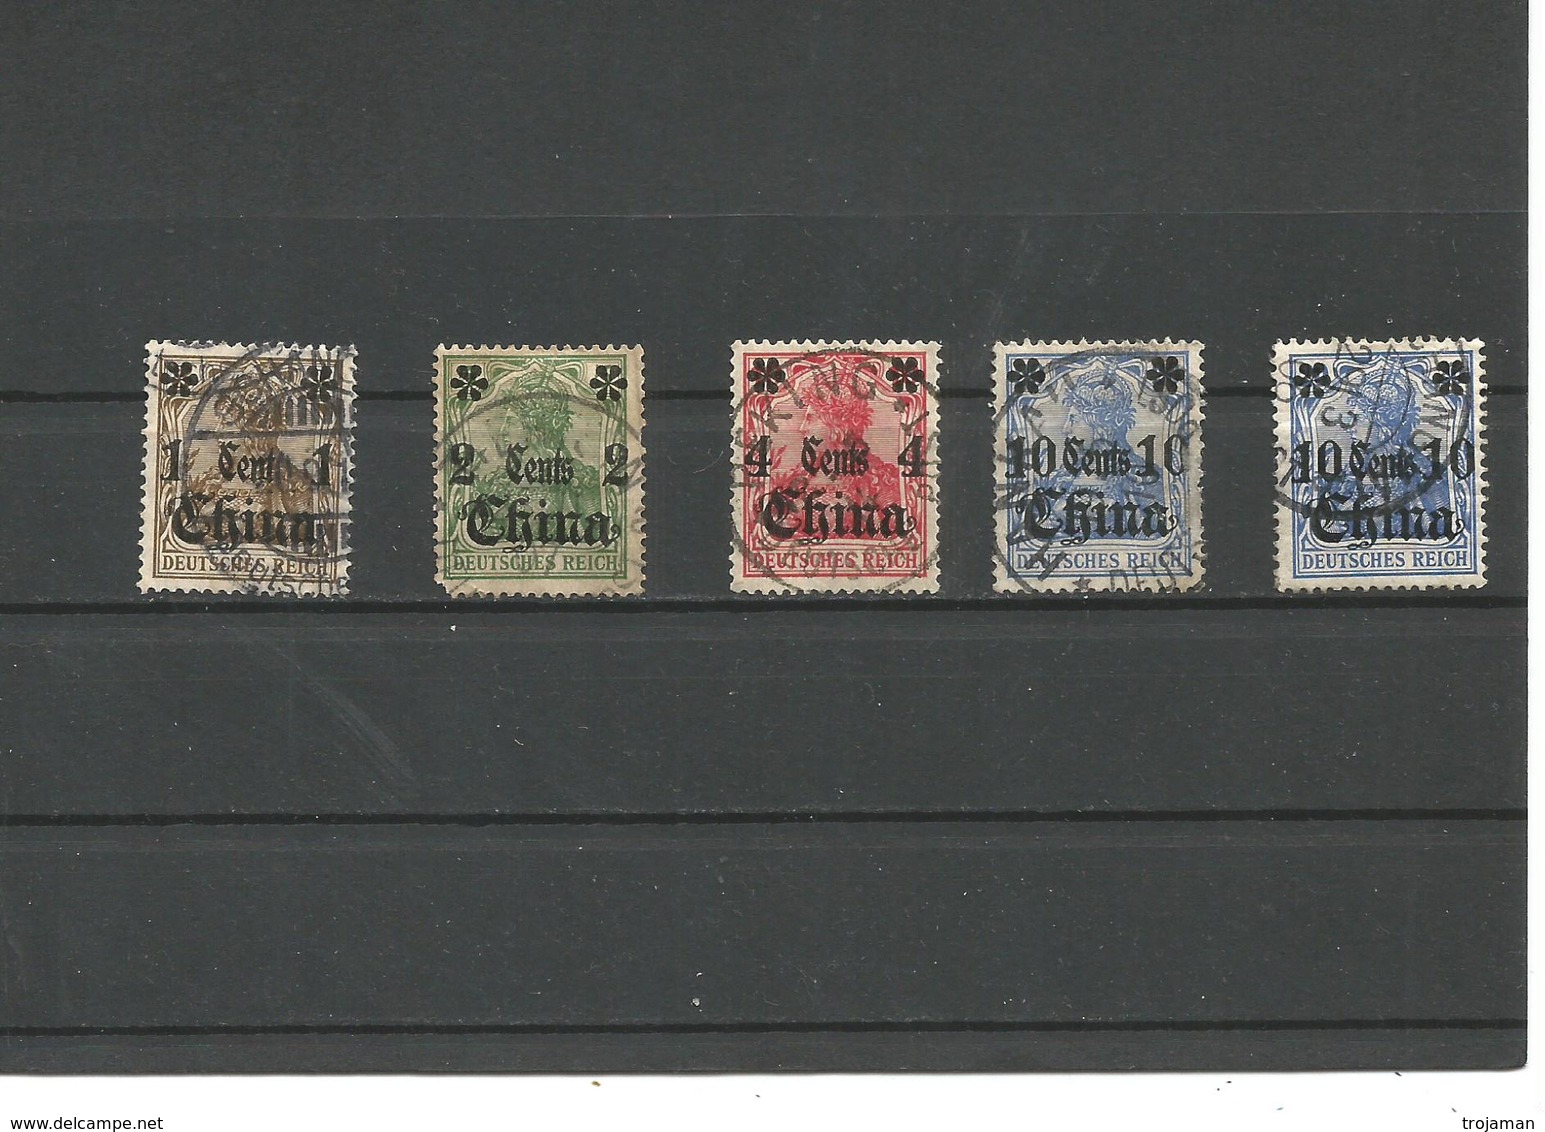 EX-M-20-04-10   5 USED STAMPS. - Deutsche Post In China